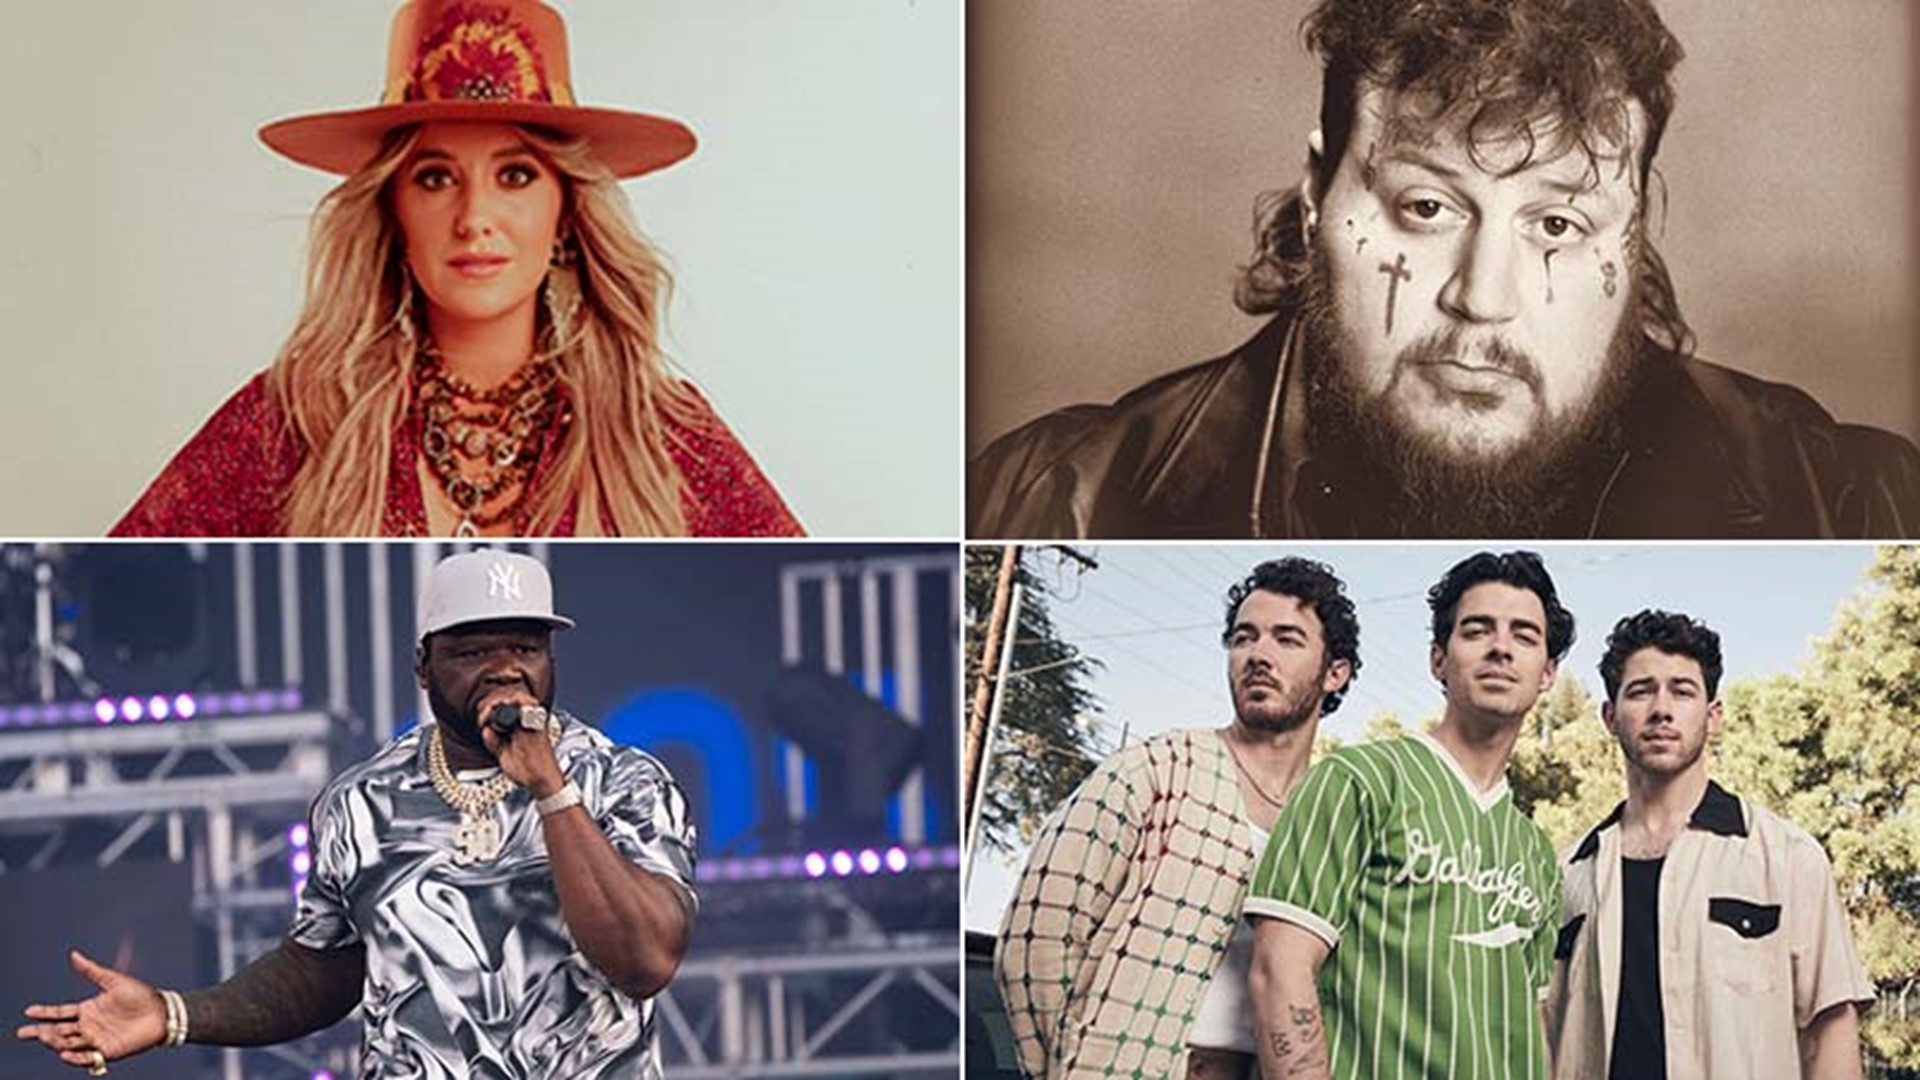 RodeoHouston is almost here and we have an update to the acts that have sold the most tickets.